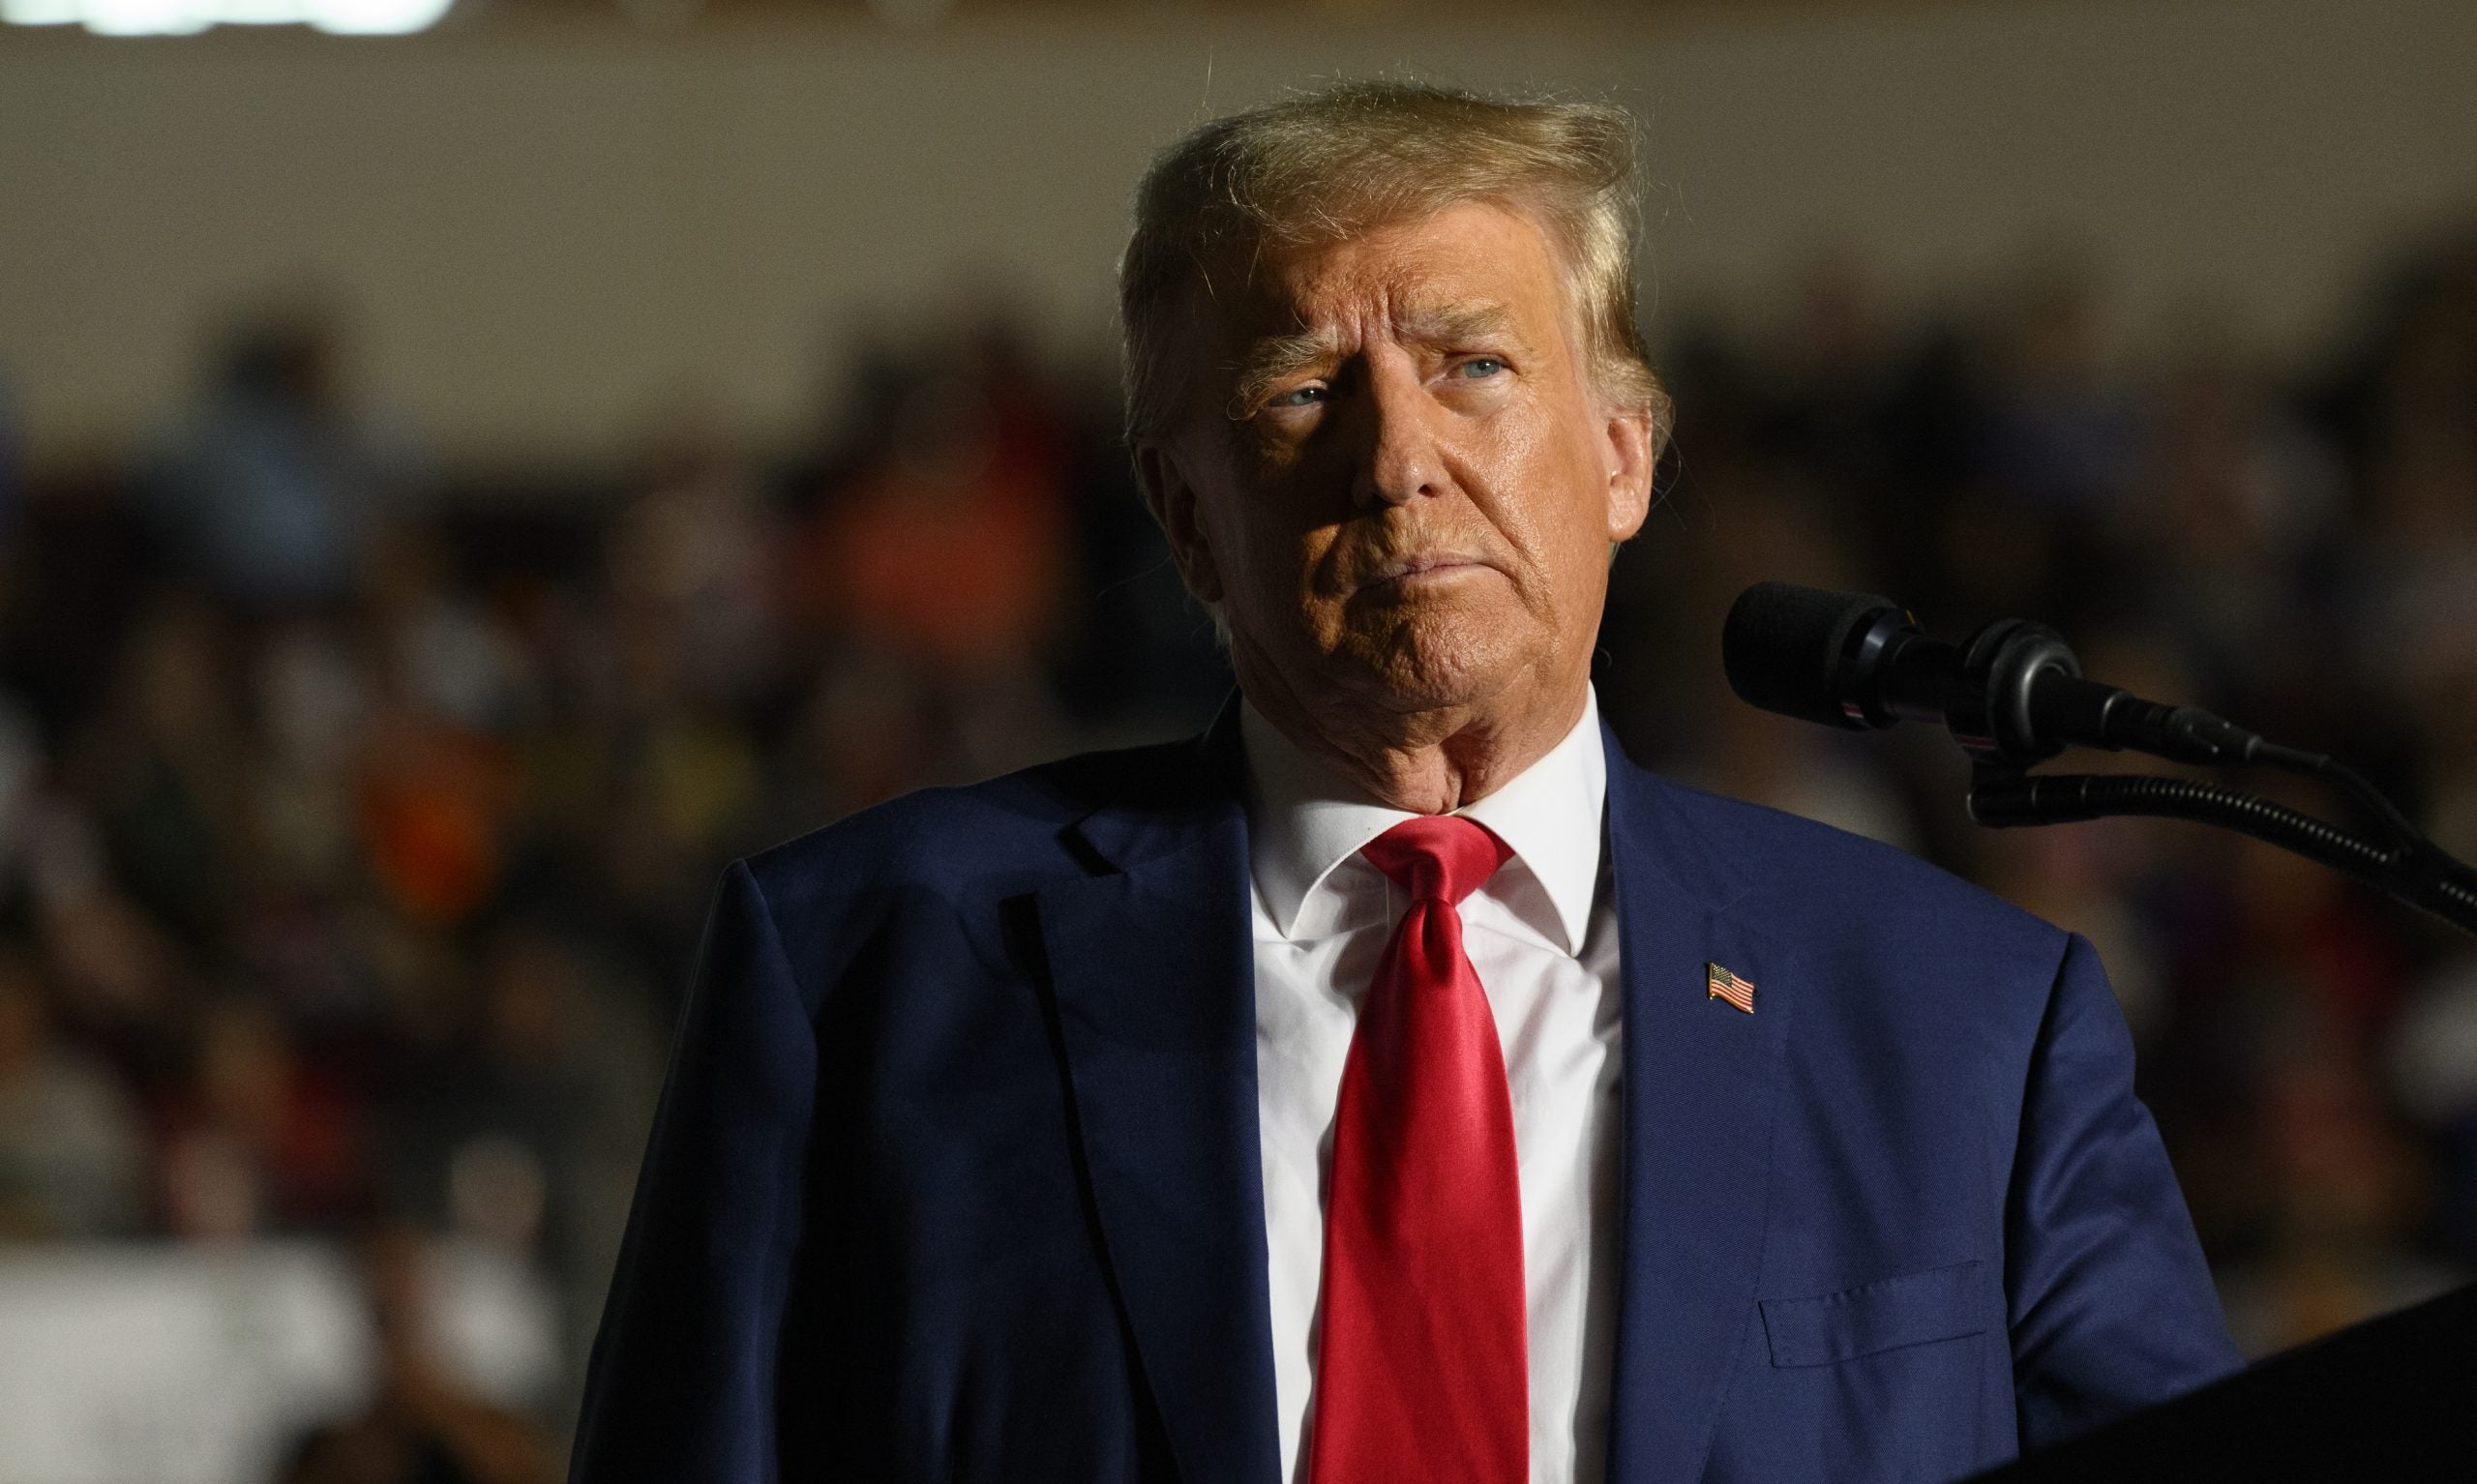 Donald Trump Indicted For 'Unprecedented' Attempt To Overturn 2020 Presidential Election